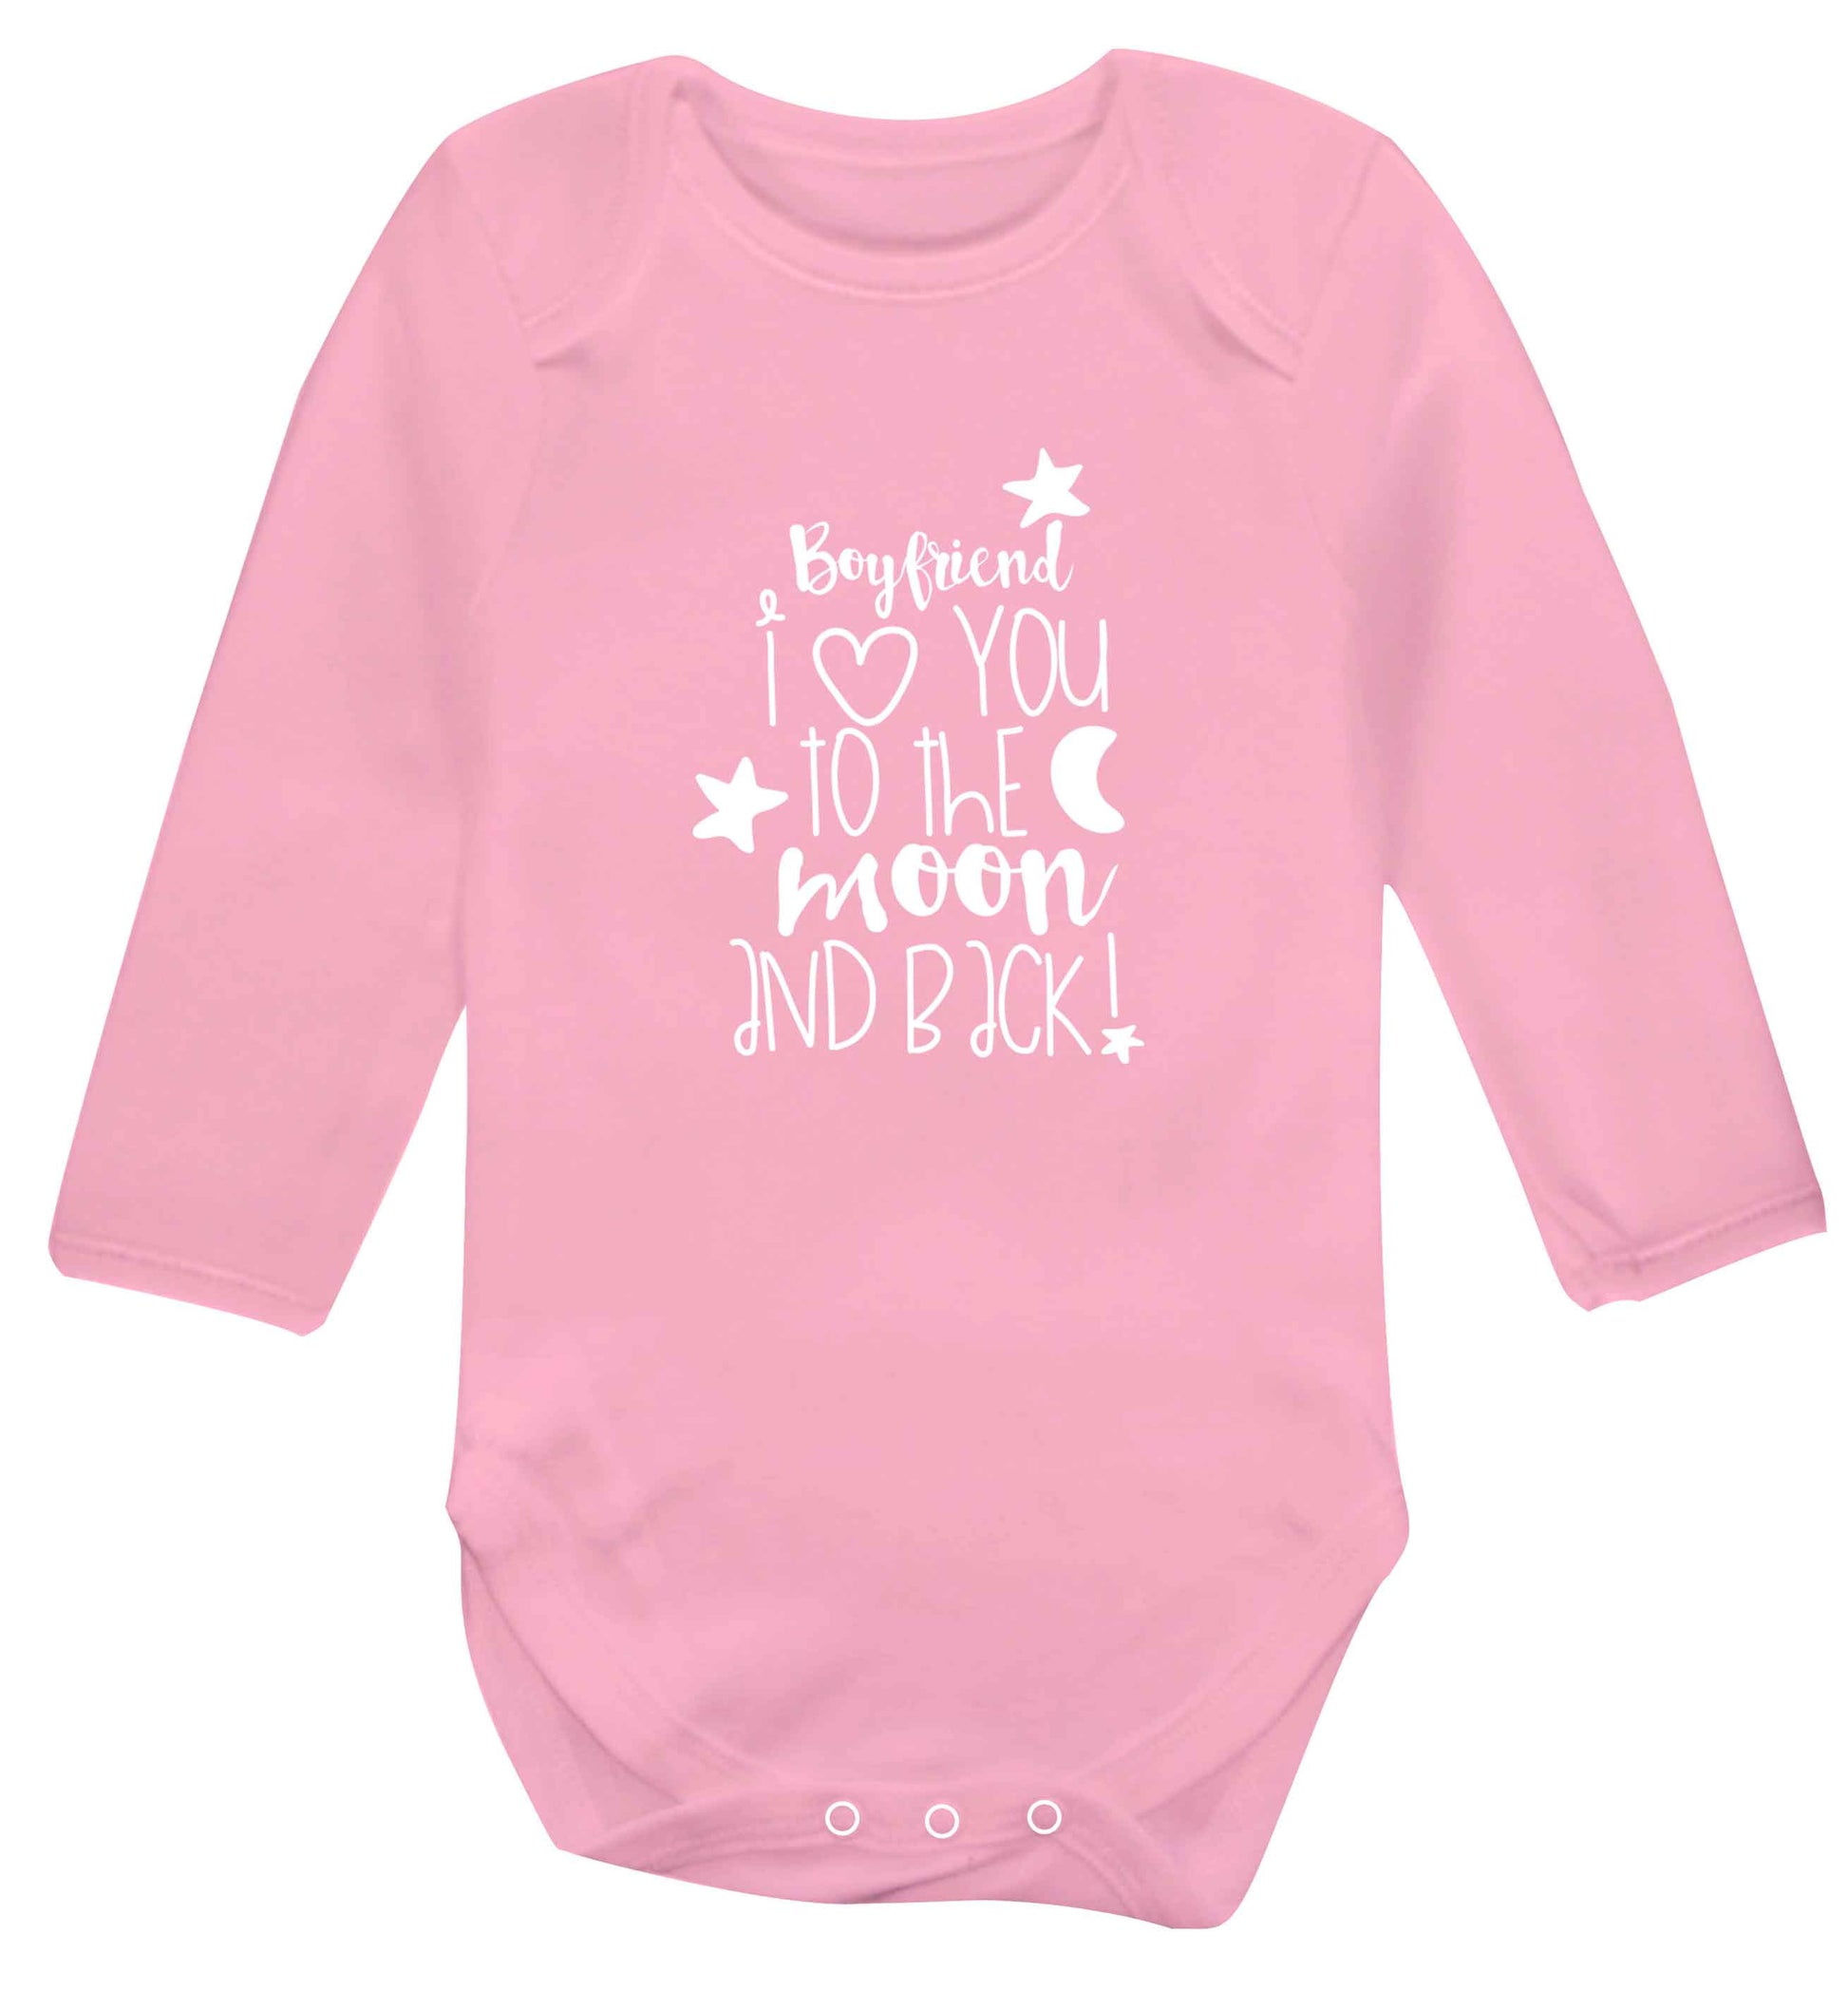 Boyfriend I love you to the moon and back baby vest long sleeved pale pink 6-12 months